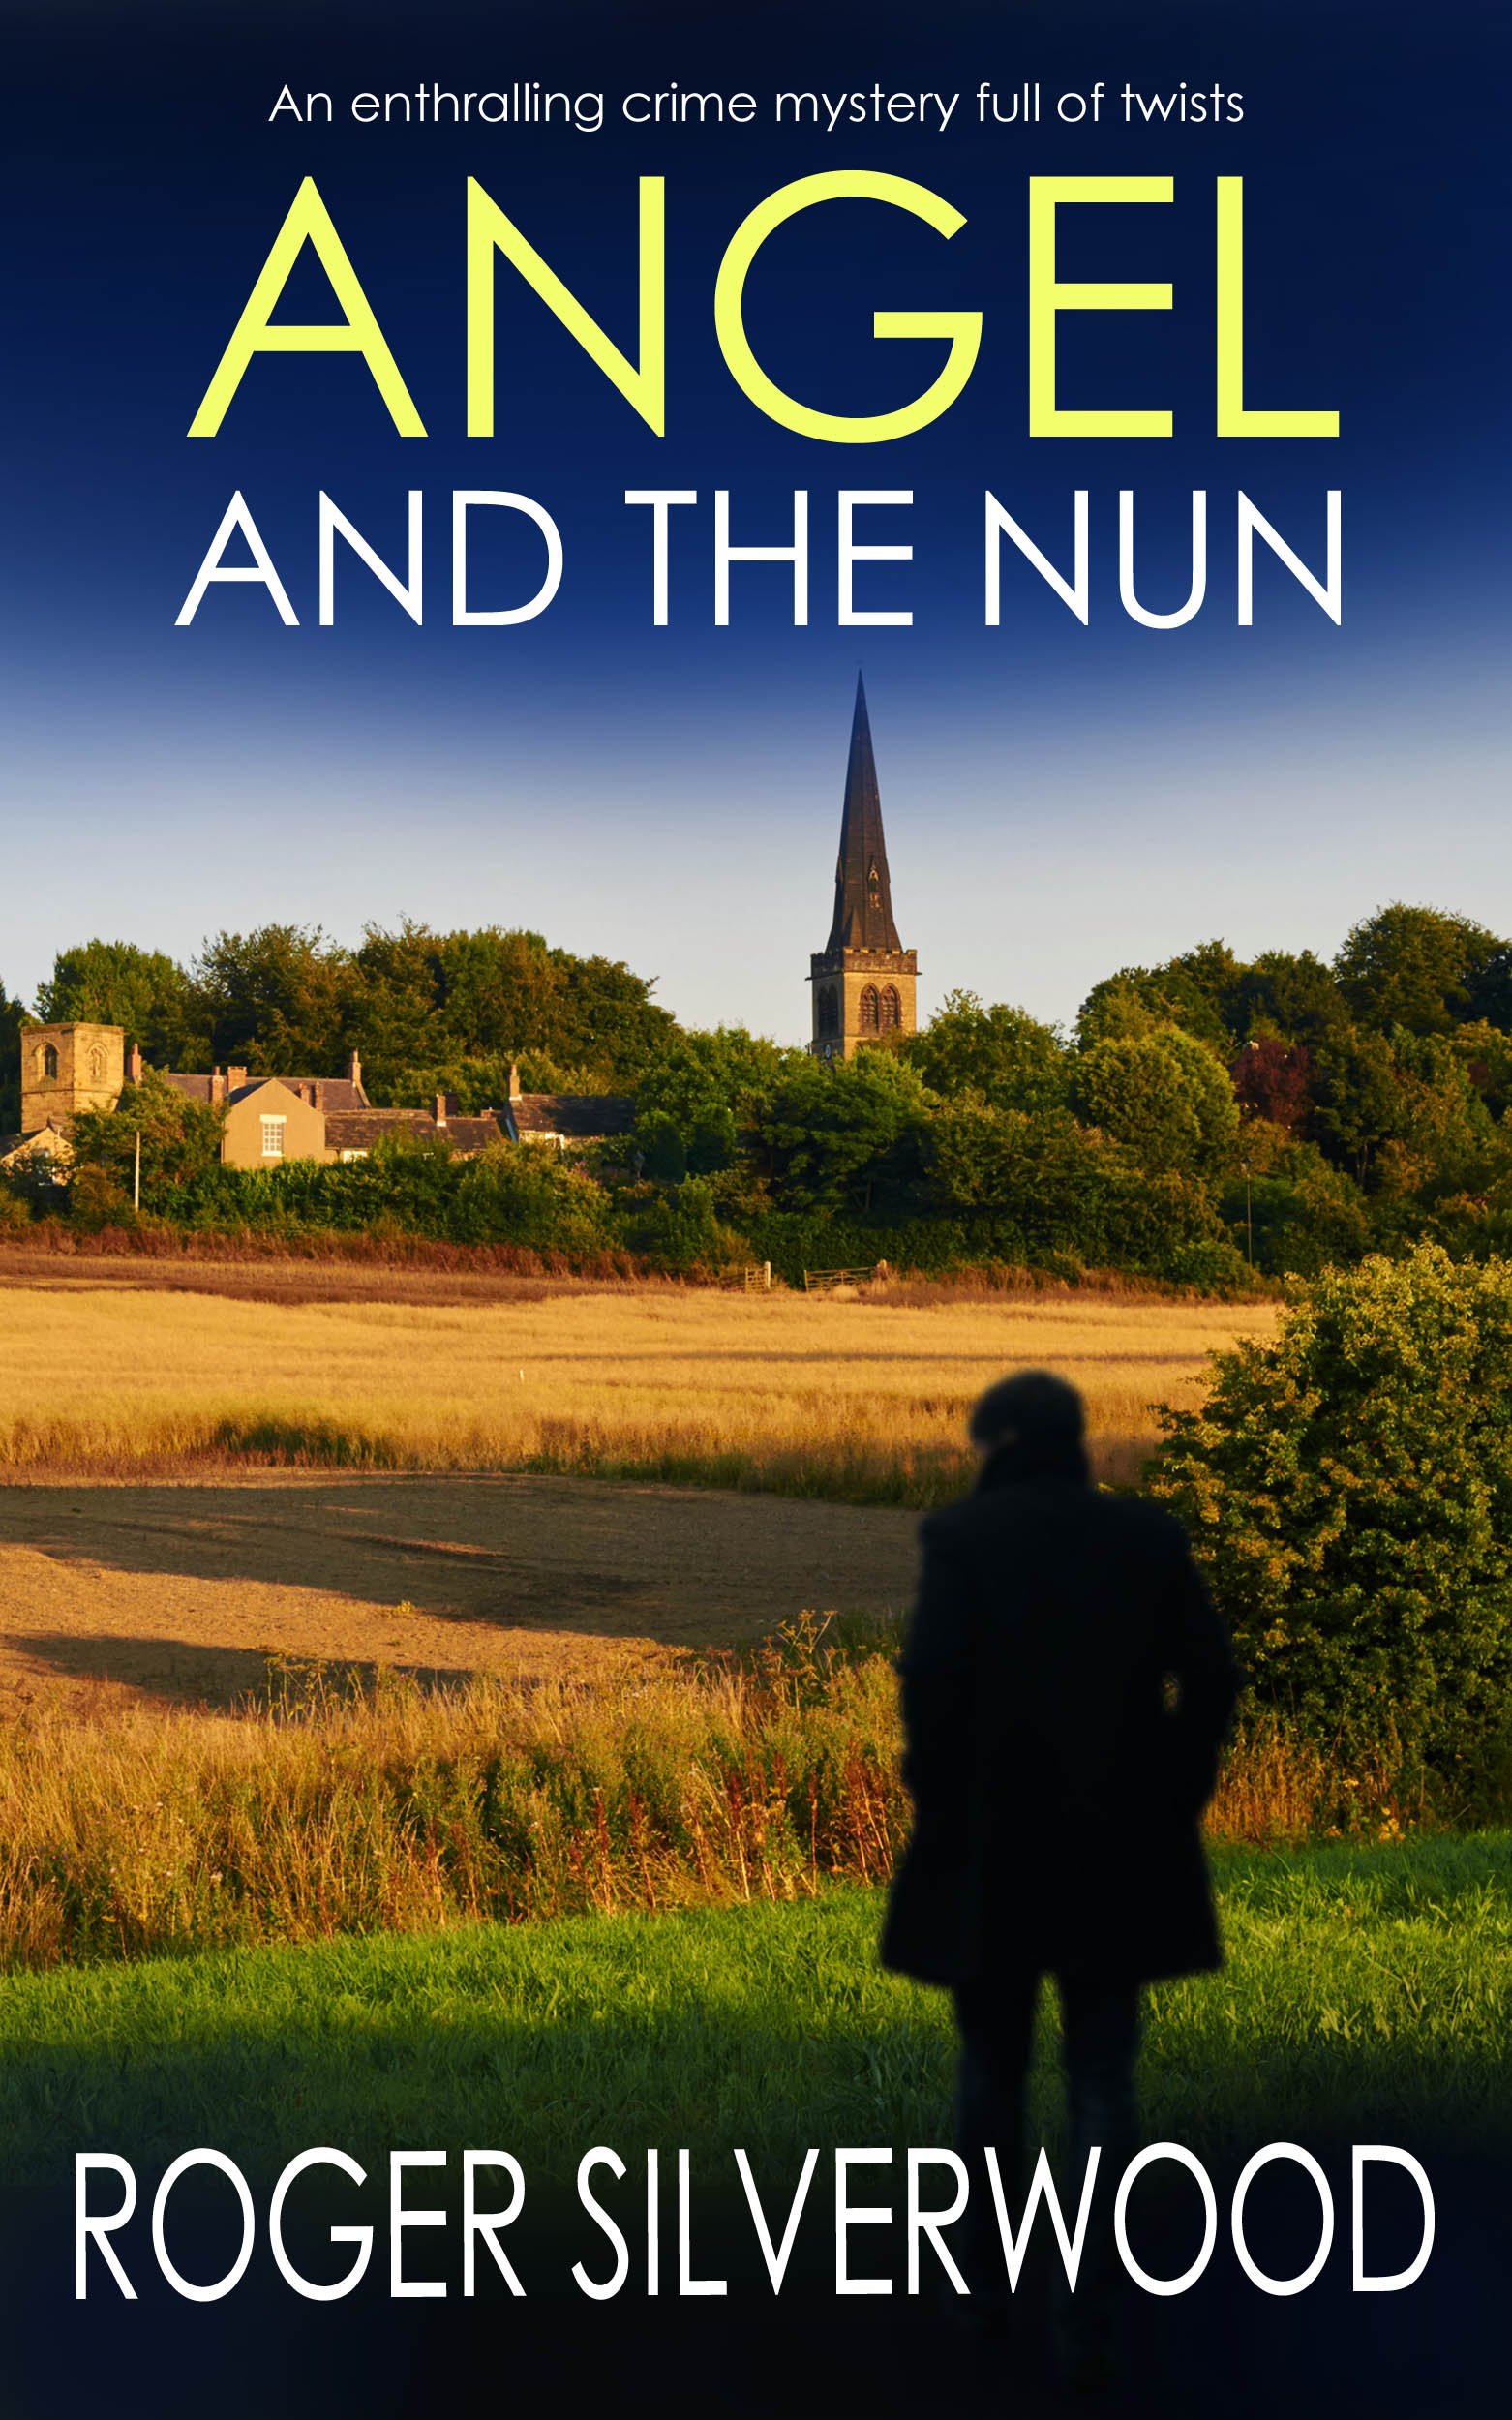 ANGEL AND THE NUN Cover publish.jpg